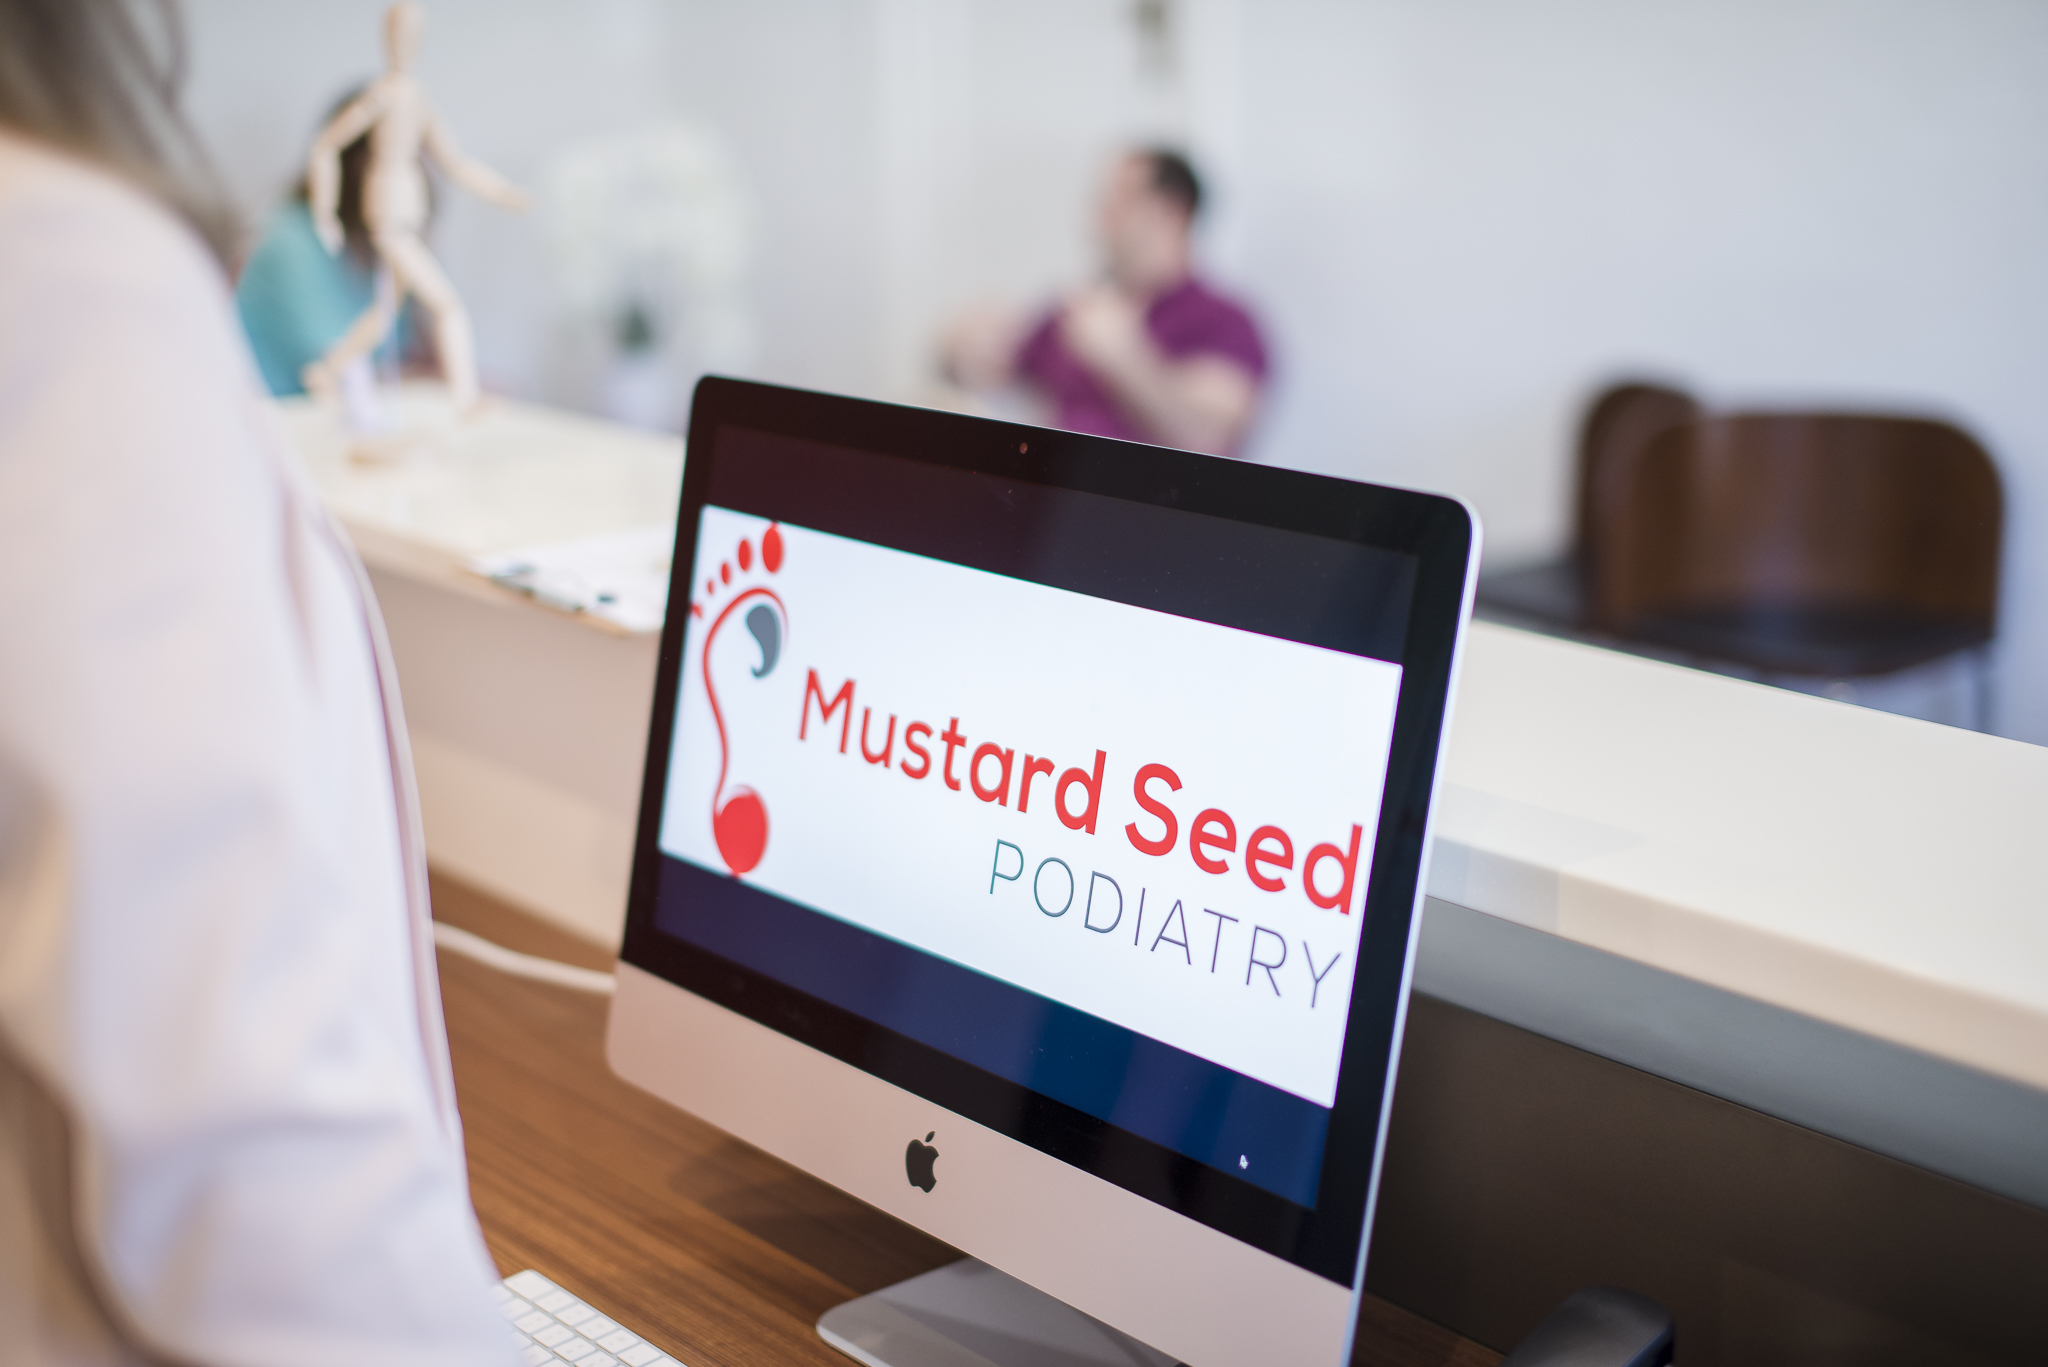 The Mustard Seed App is now LIVE!